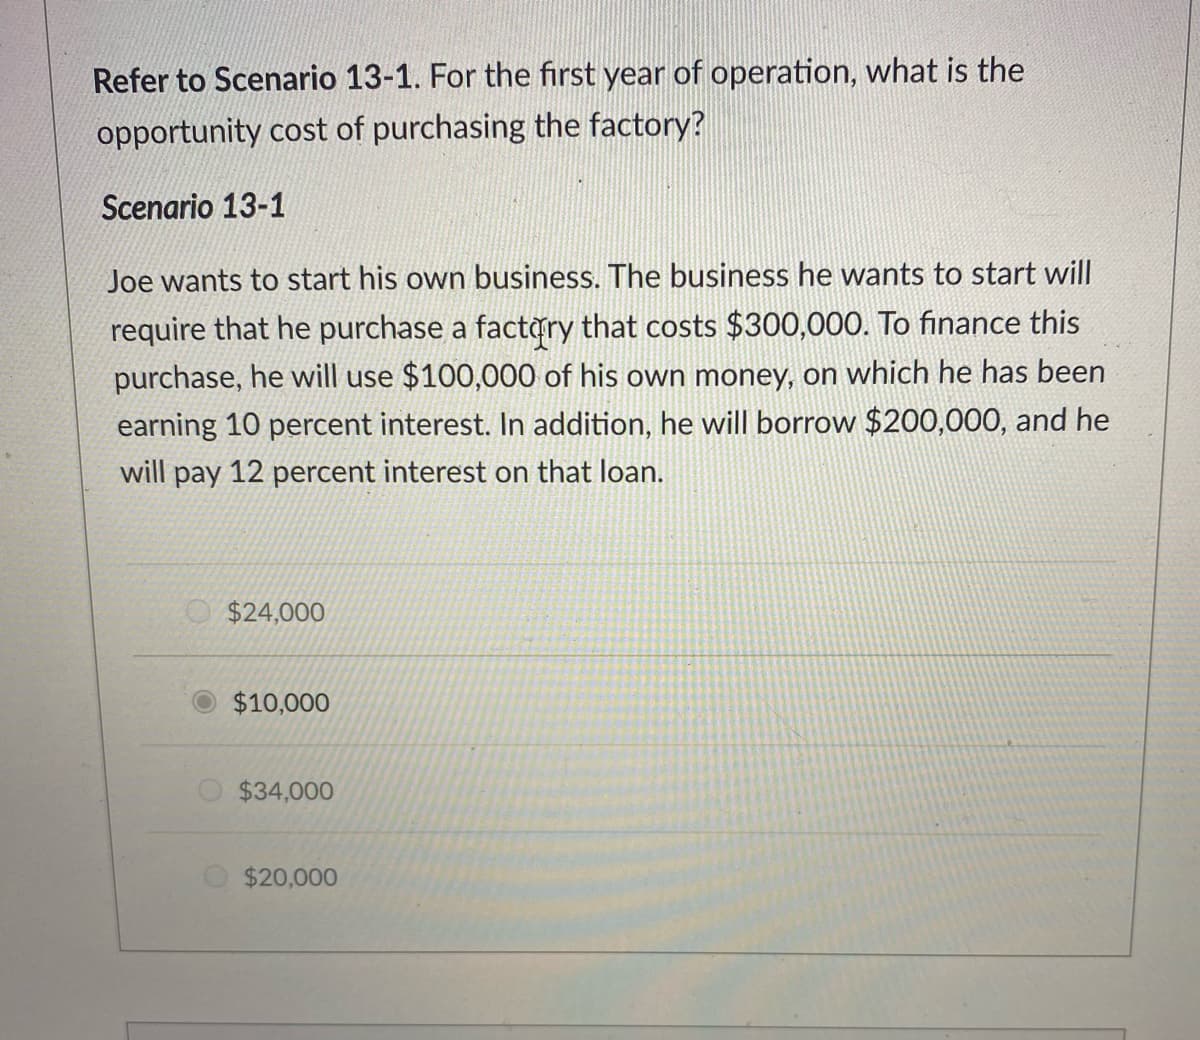 Refer to Scenario 13-1. For the first year of operation, what is the
opportunity cost of purchasing the factory?
Scenario 13-1
Joe wants to start his own business. The business he wants to start will
require that he purchase a factry that costs $300,000. To finance this
purchase, he will use $100,000 of his own money, on which he has been
earning 10 percent interest. In addition, he will borrow $200,000, and he
will pay 12 percent interest on that loan.
O $24,000
$10,000
$34,000
$20,000
